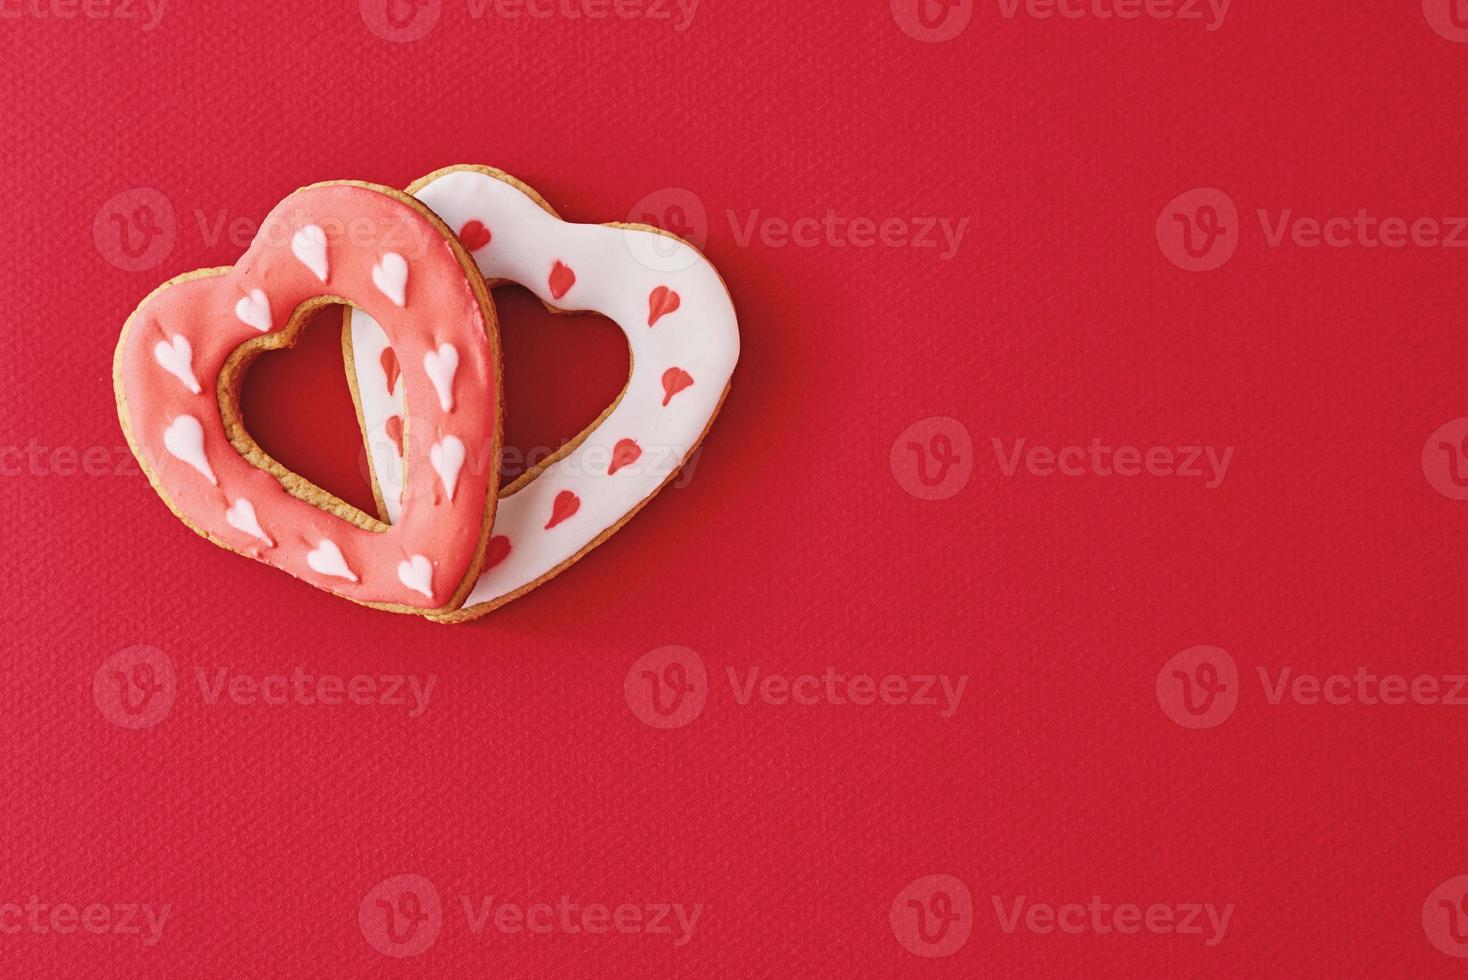 Two decorated with icing and glazed heart shape cookies on the red background with copy space. Valentines Day food concept photo